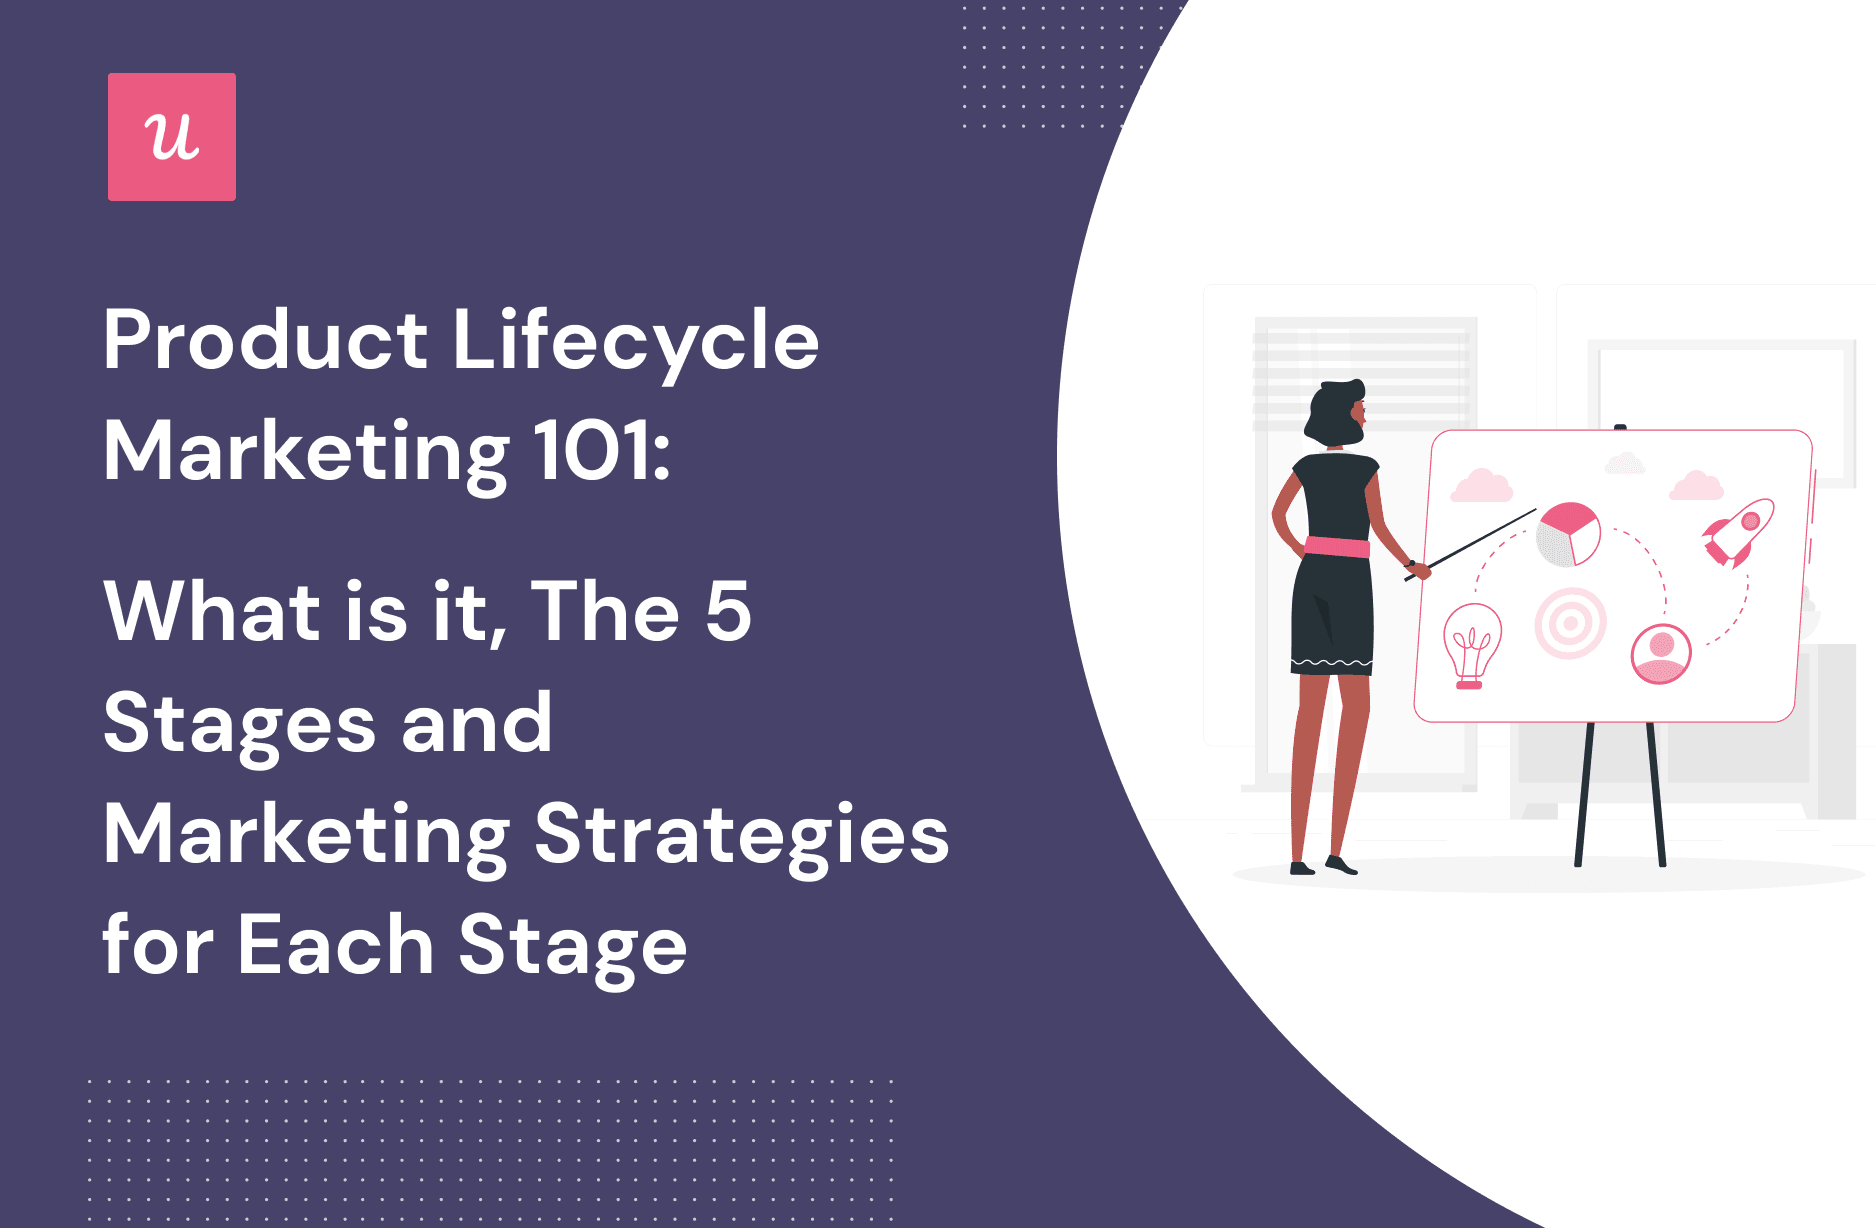 Product Lifecycle Marketing 101: What Is It, the 5 Stages, and Marketing Strategies for Each Stage cover